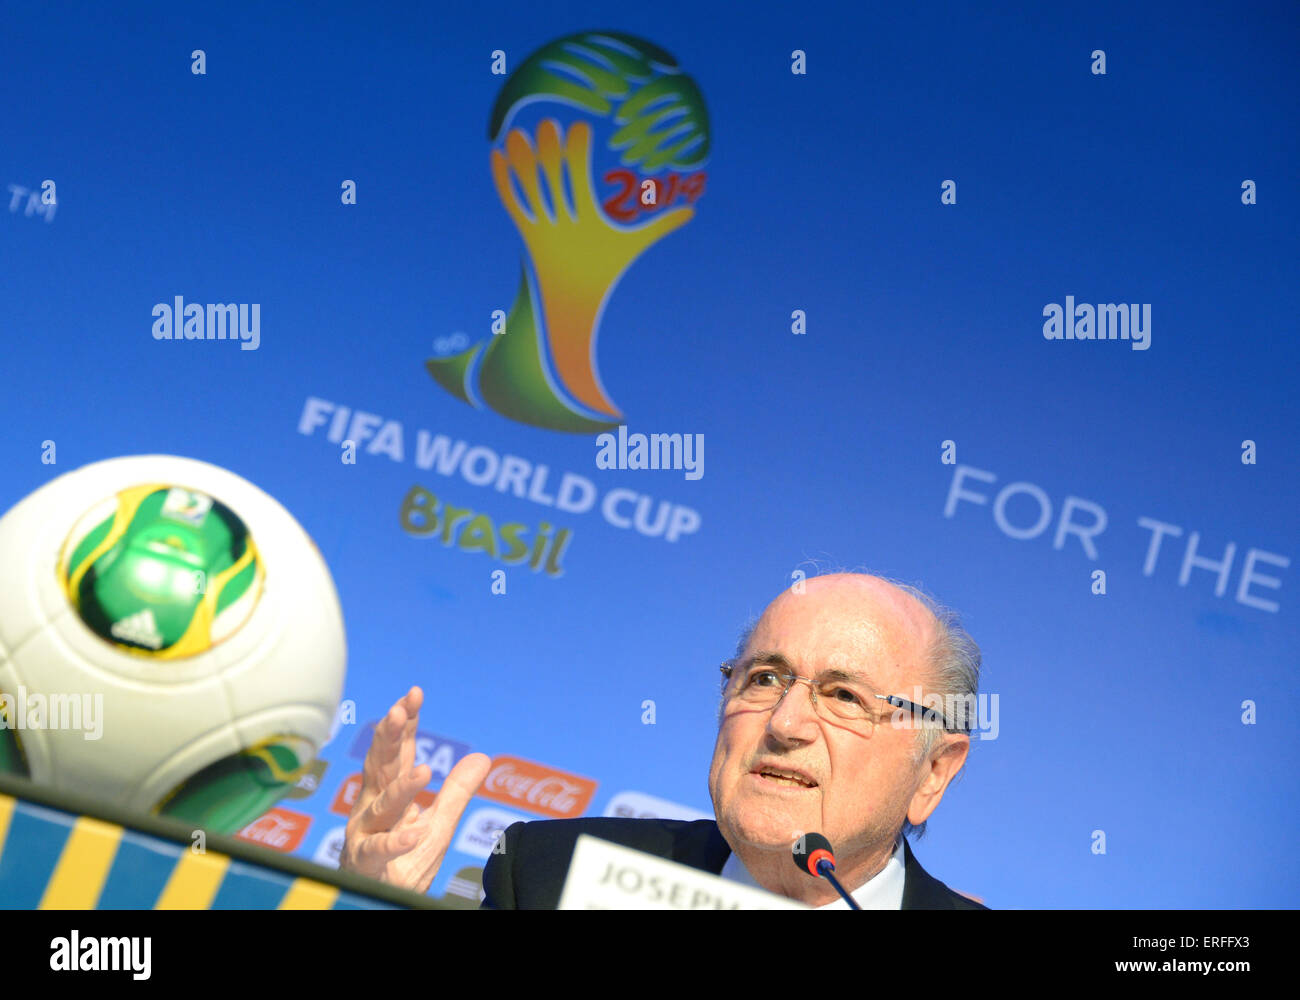 FIFA president Joseph Blatter attends a press conference following the meeting of the Organising Committee for the FIFA World Cup 2014 in Costa do Sauipe, Brazil, 03 December 2013. The final draw for the preliminary round groups of the 2014 FIFA world cup Brazil will be held on 06 December 2013. Photo: Marcus Brandt/dpa Stock Photo